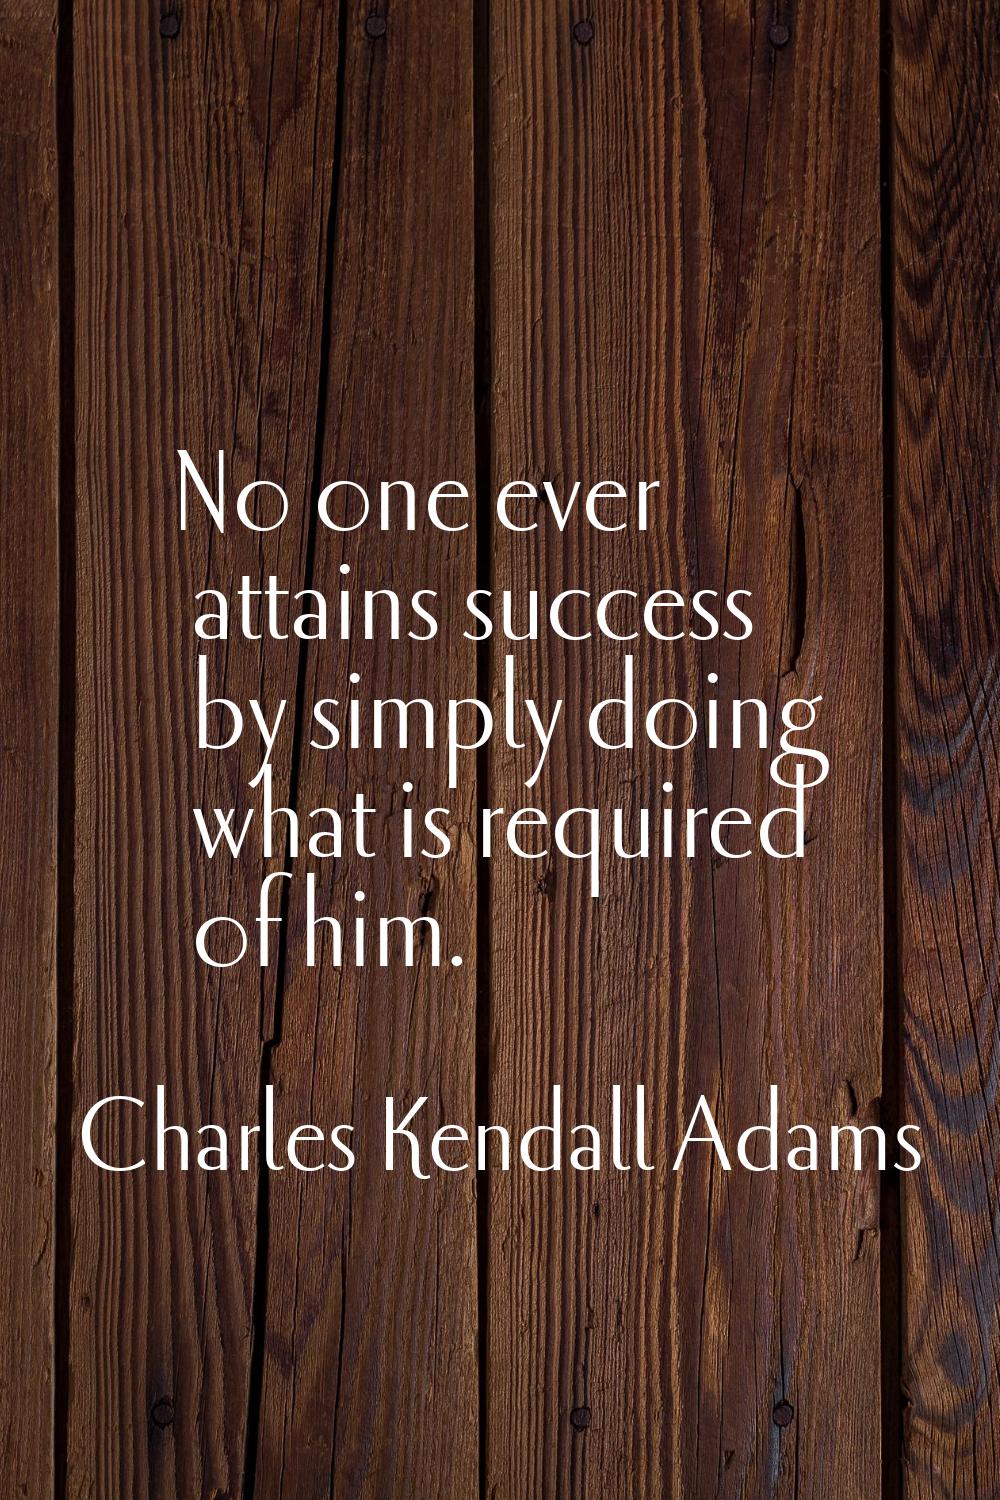 No one ever attains success by simply doing what is required of him.